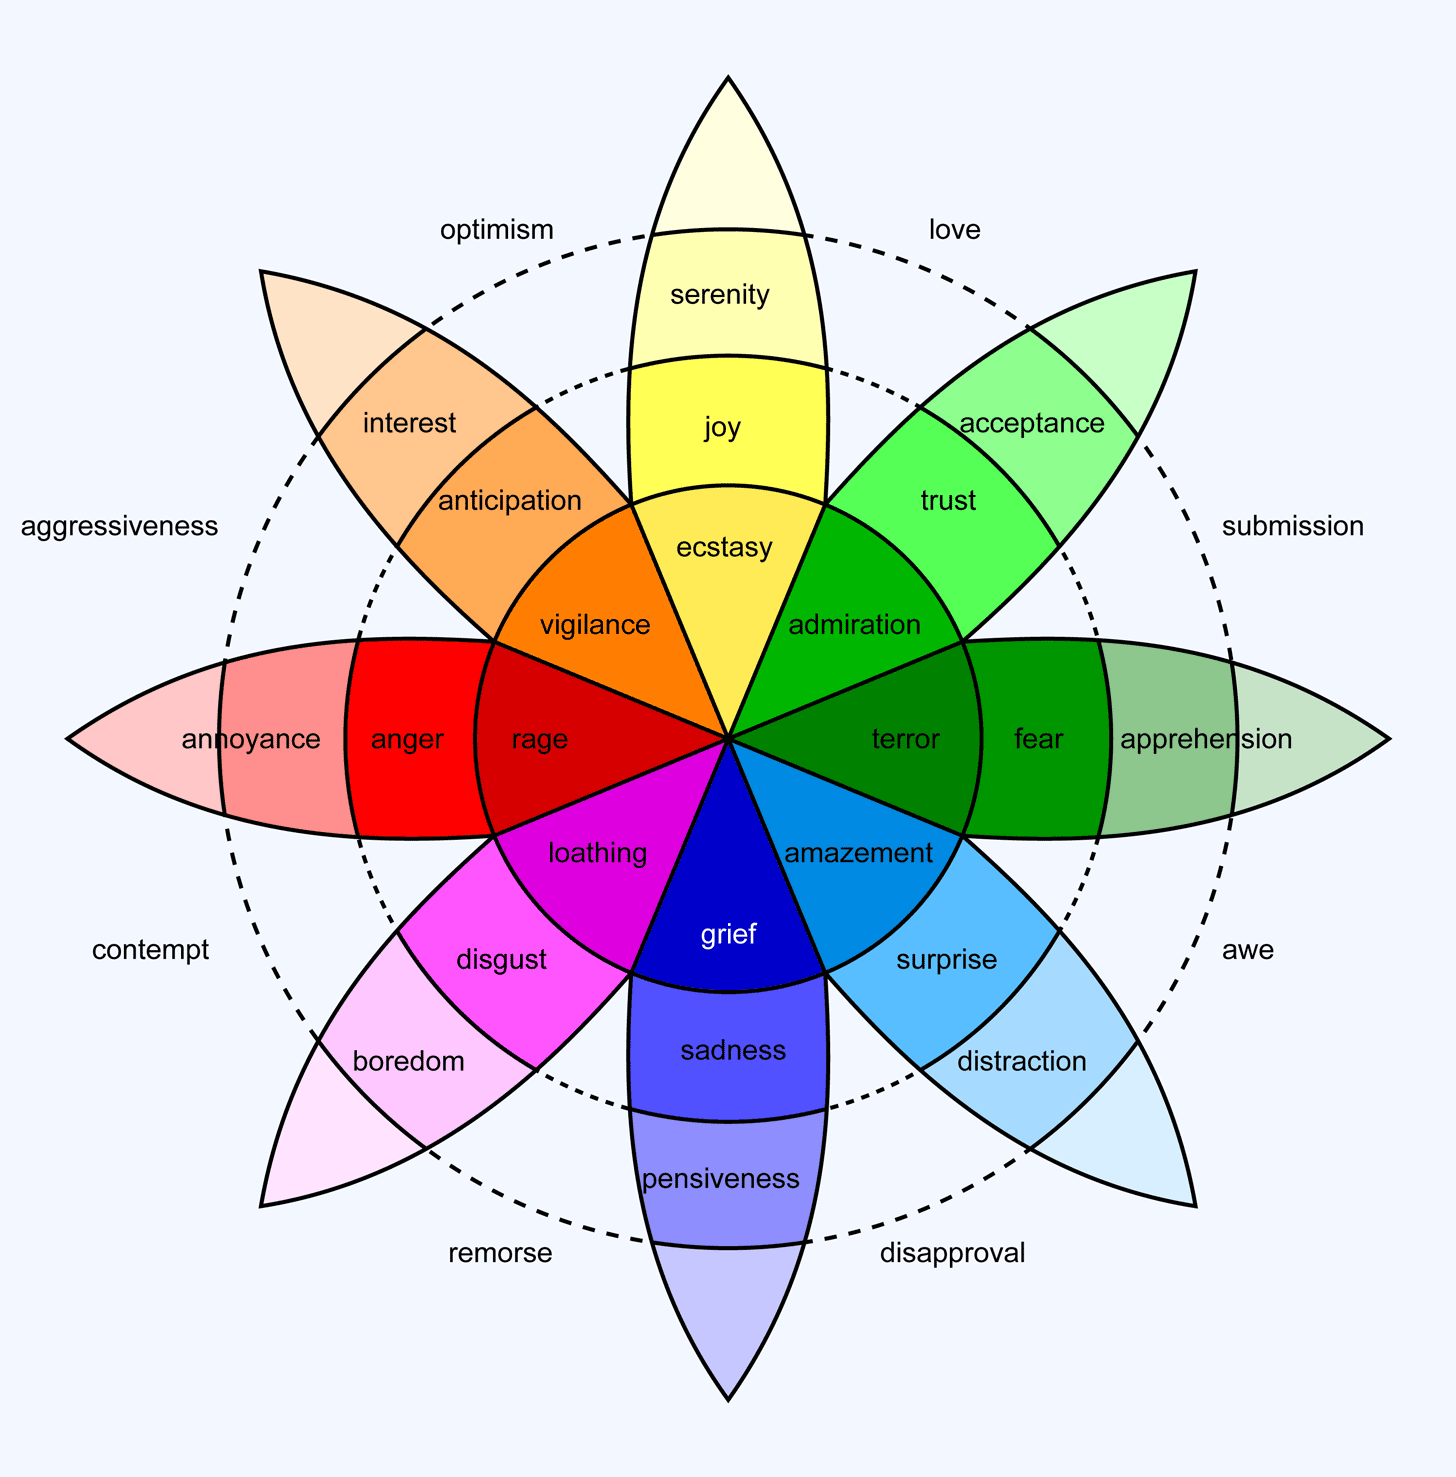 A colorful wheel containing different emotions (listed in this list) with variations (based on intensity) of each emotion